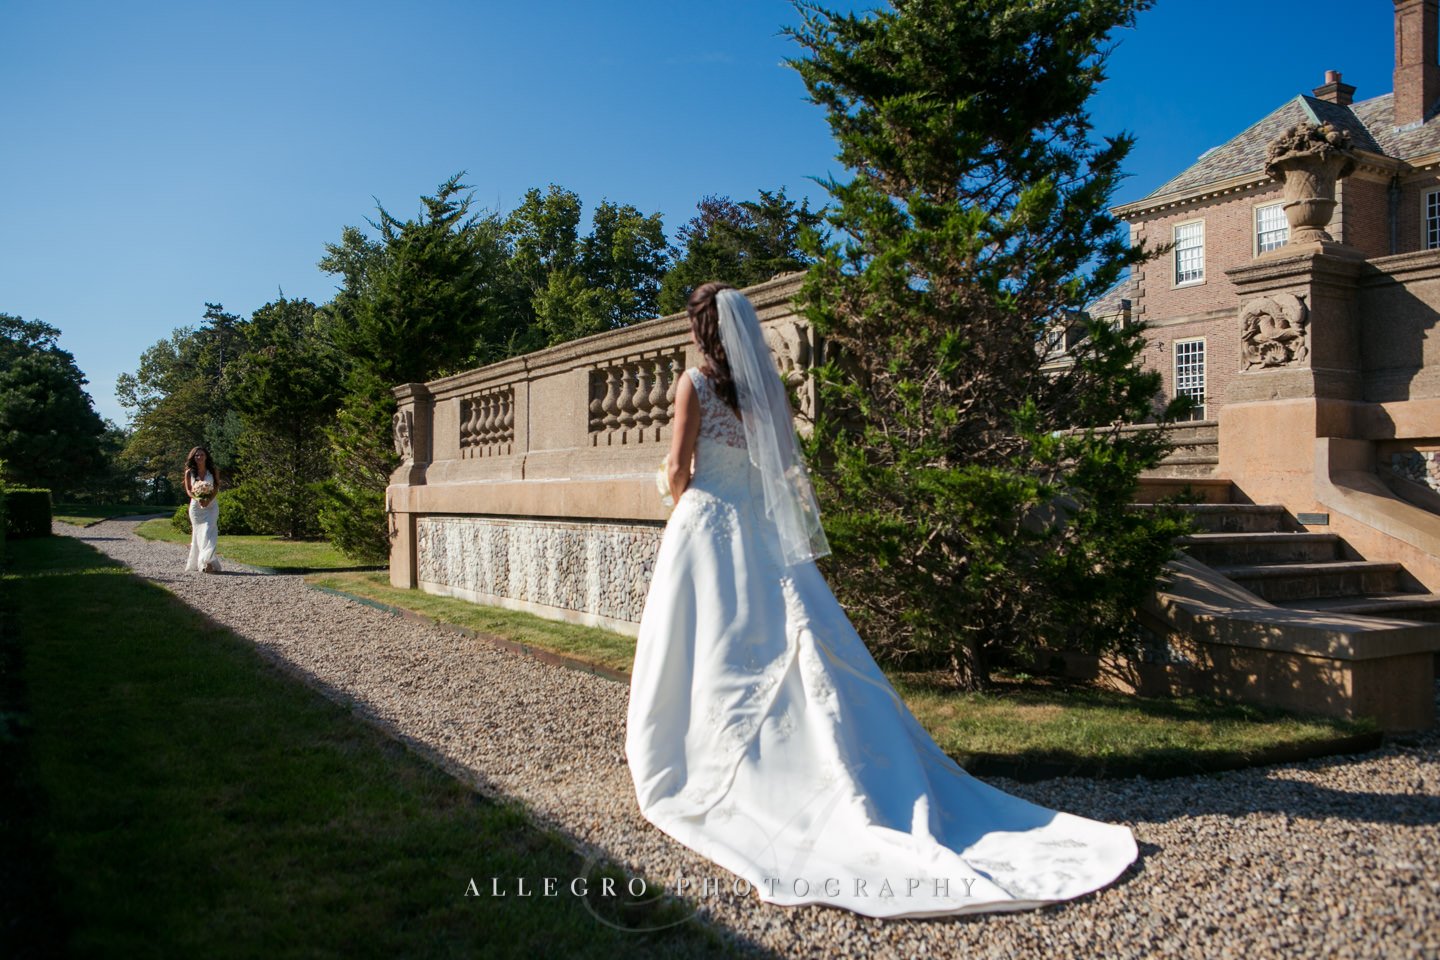 brides first look - photo by Allegro Photography